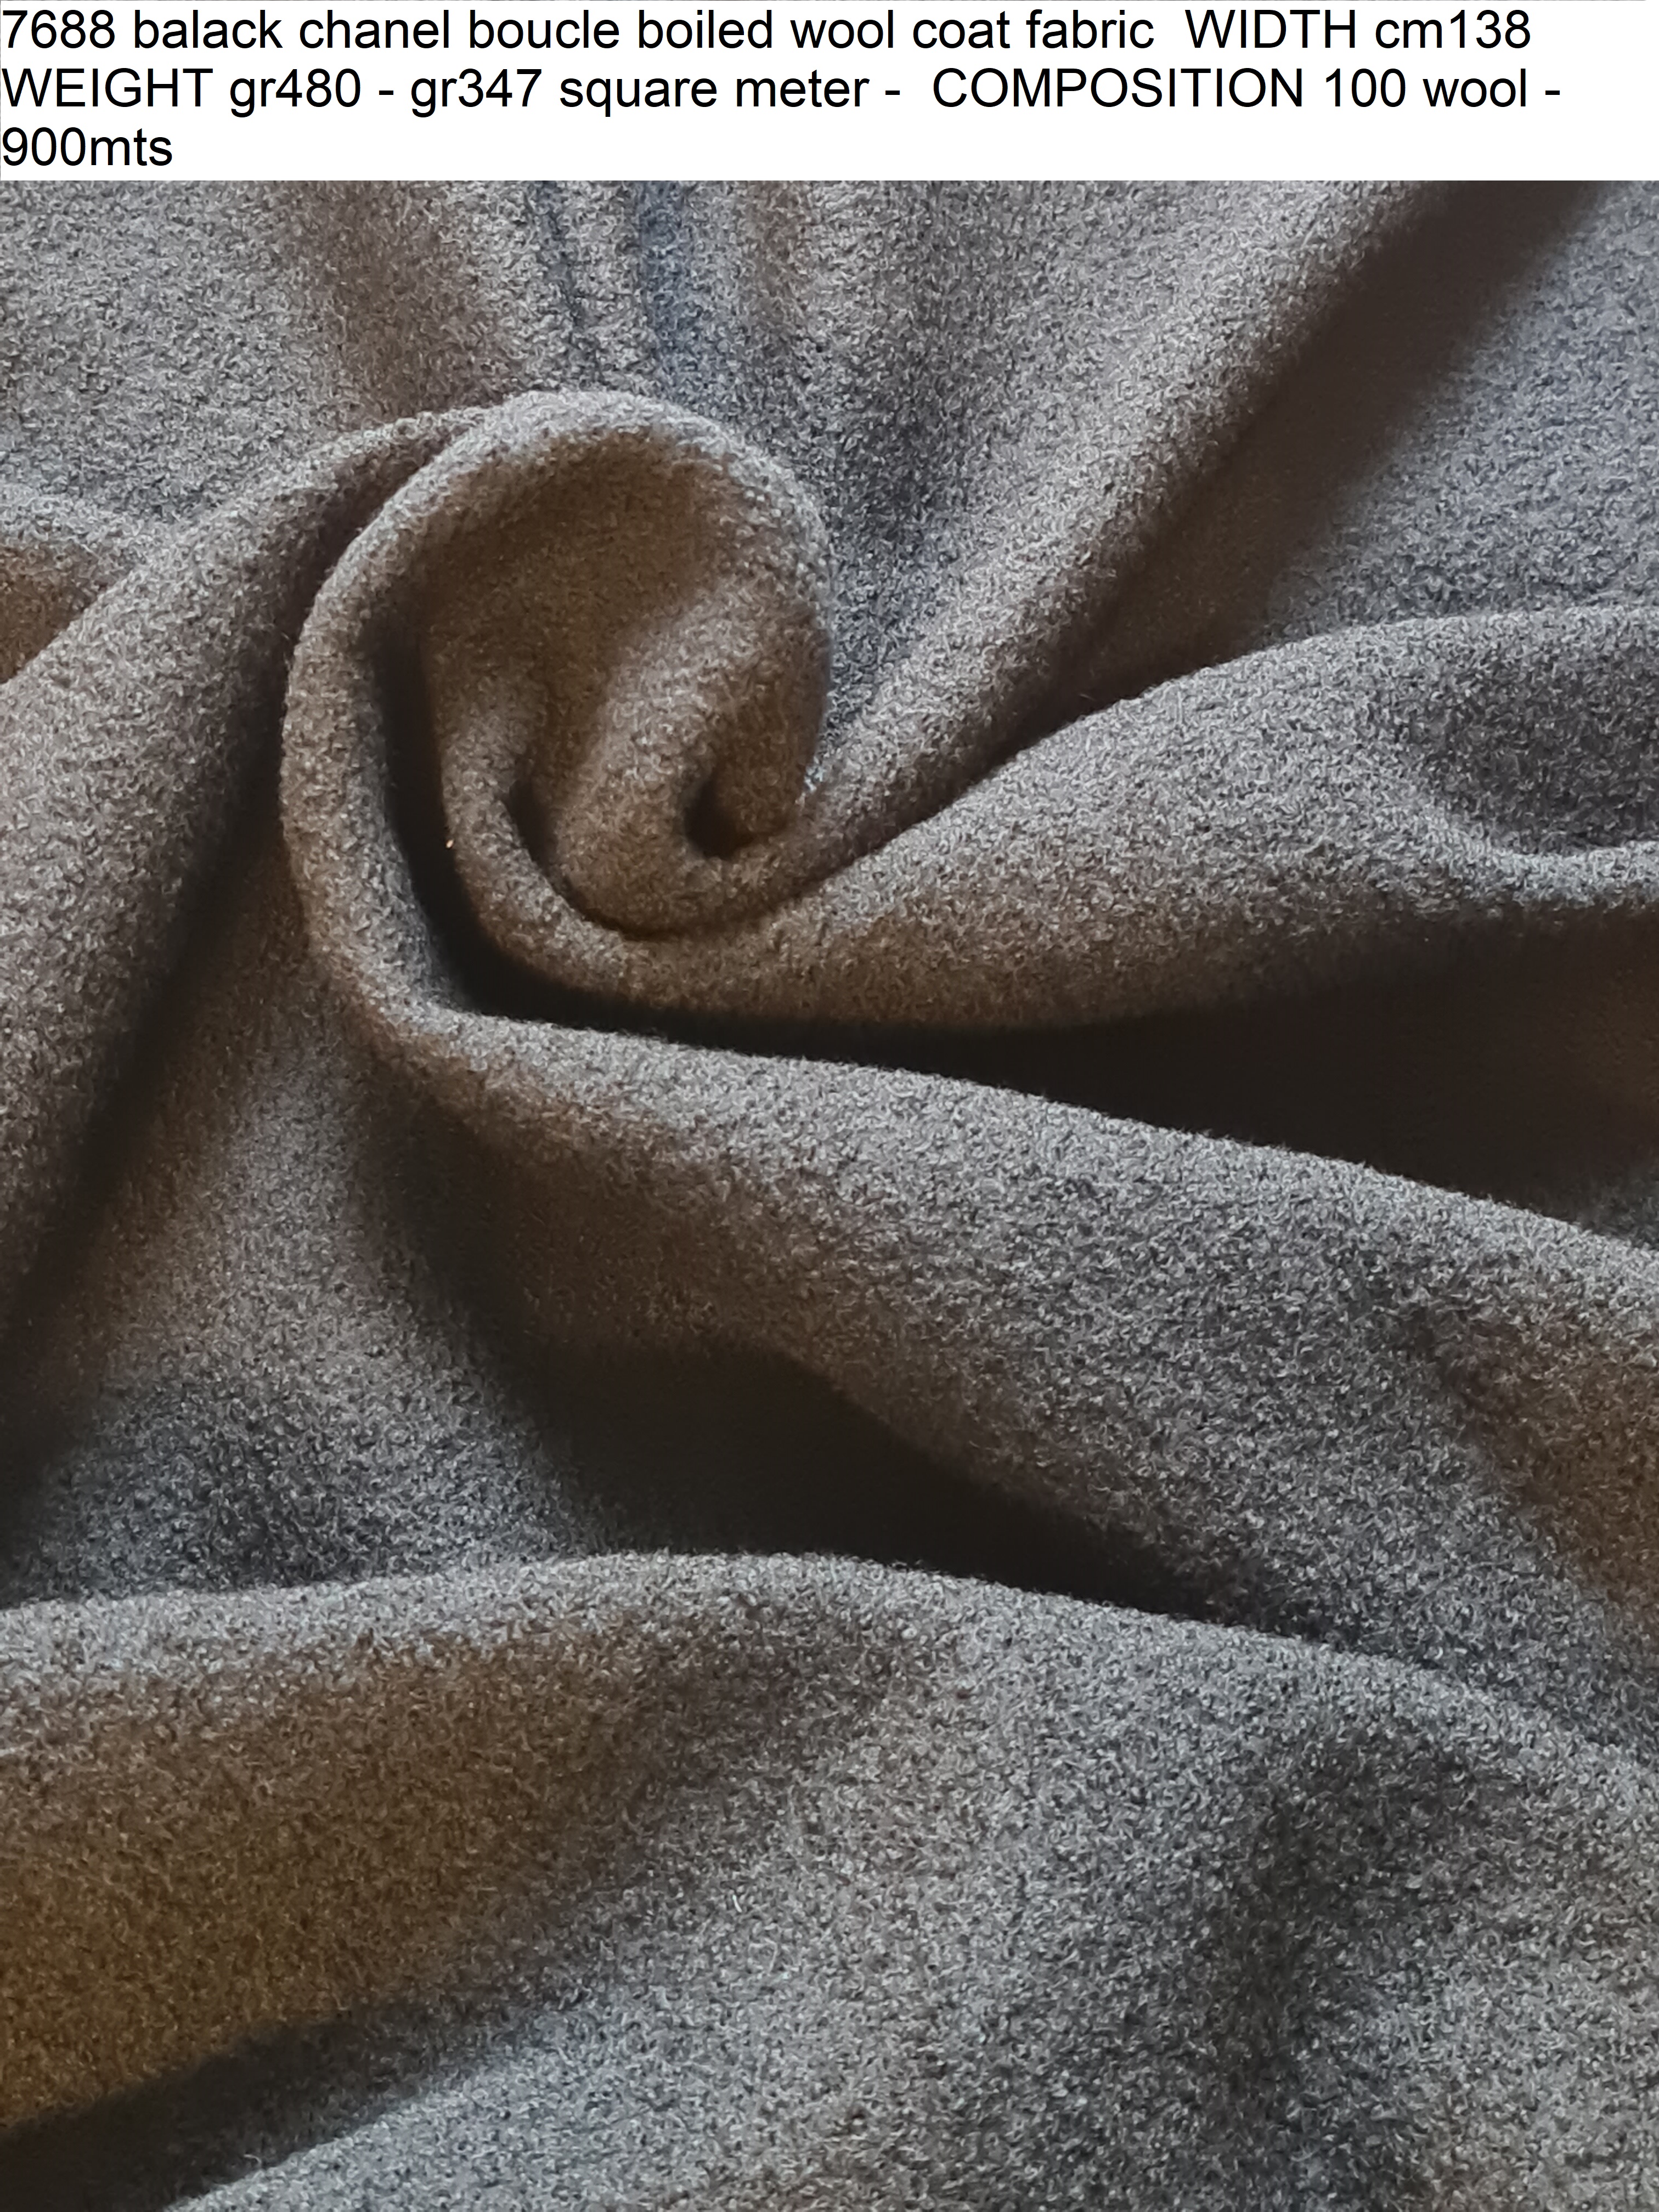 7688 balack chanel boucle boiled wool coat fabric WIDTH cm138 WEIGHT gr480 - gr347 square meter - COMPOSITION 100 wool - 900mts